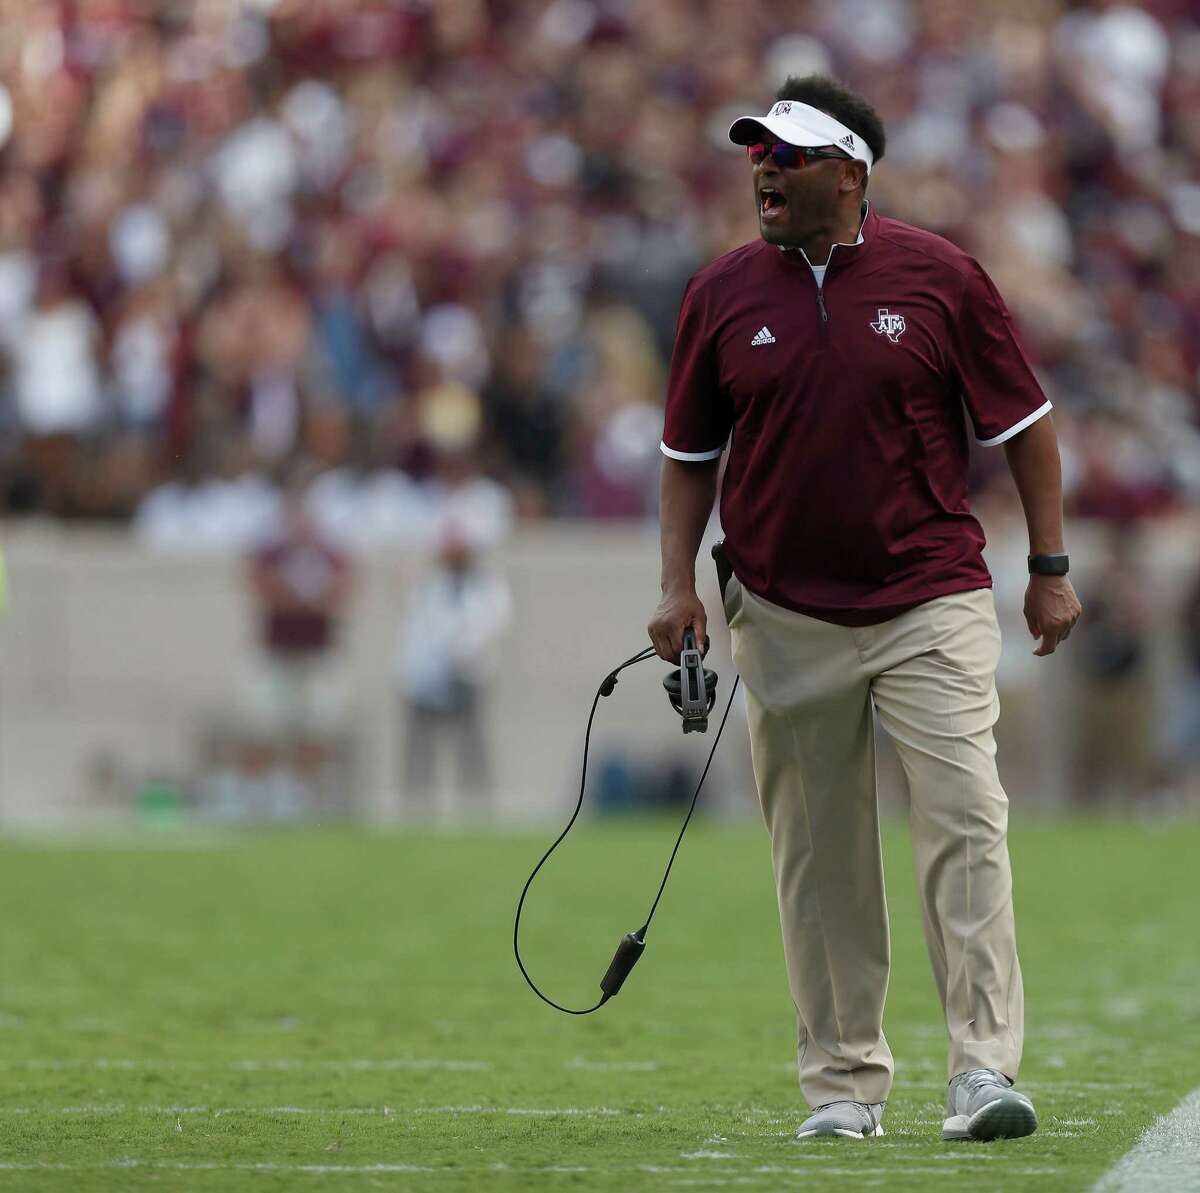 Texas A&M Aggies head coach Kevin Sumlin reacts during the second quarter of a college football game at Kyle Field, Saturday, Oct. 8, 2016 in College Station. ( Karen Warren / Houston Chronicle )